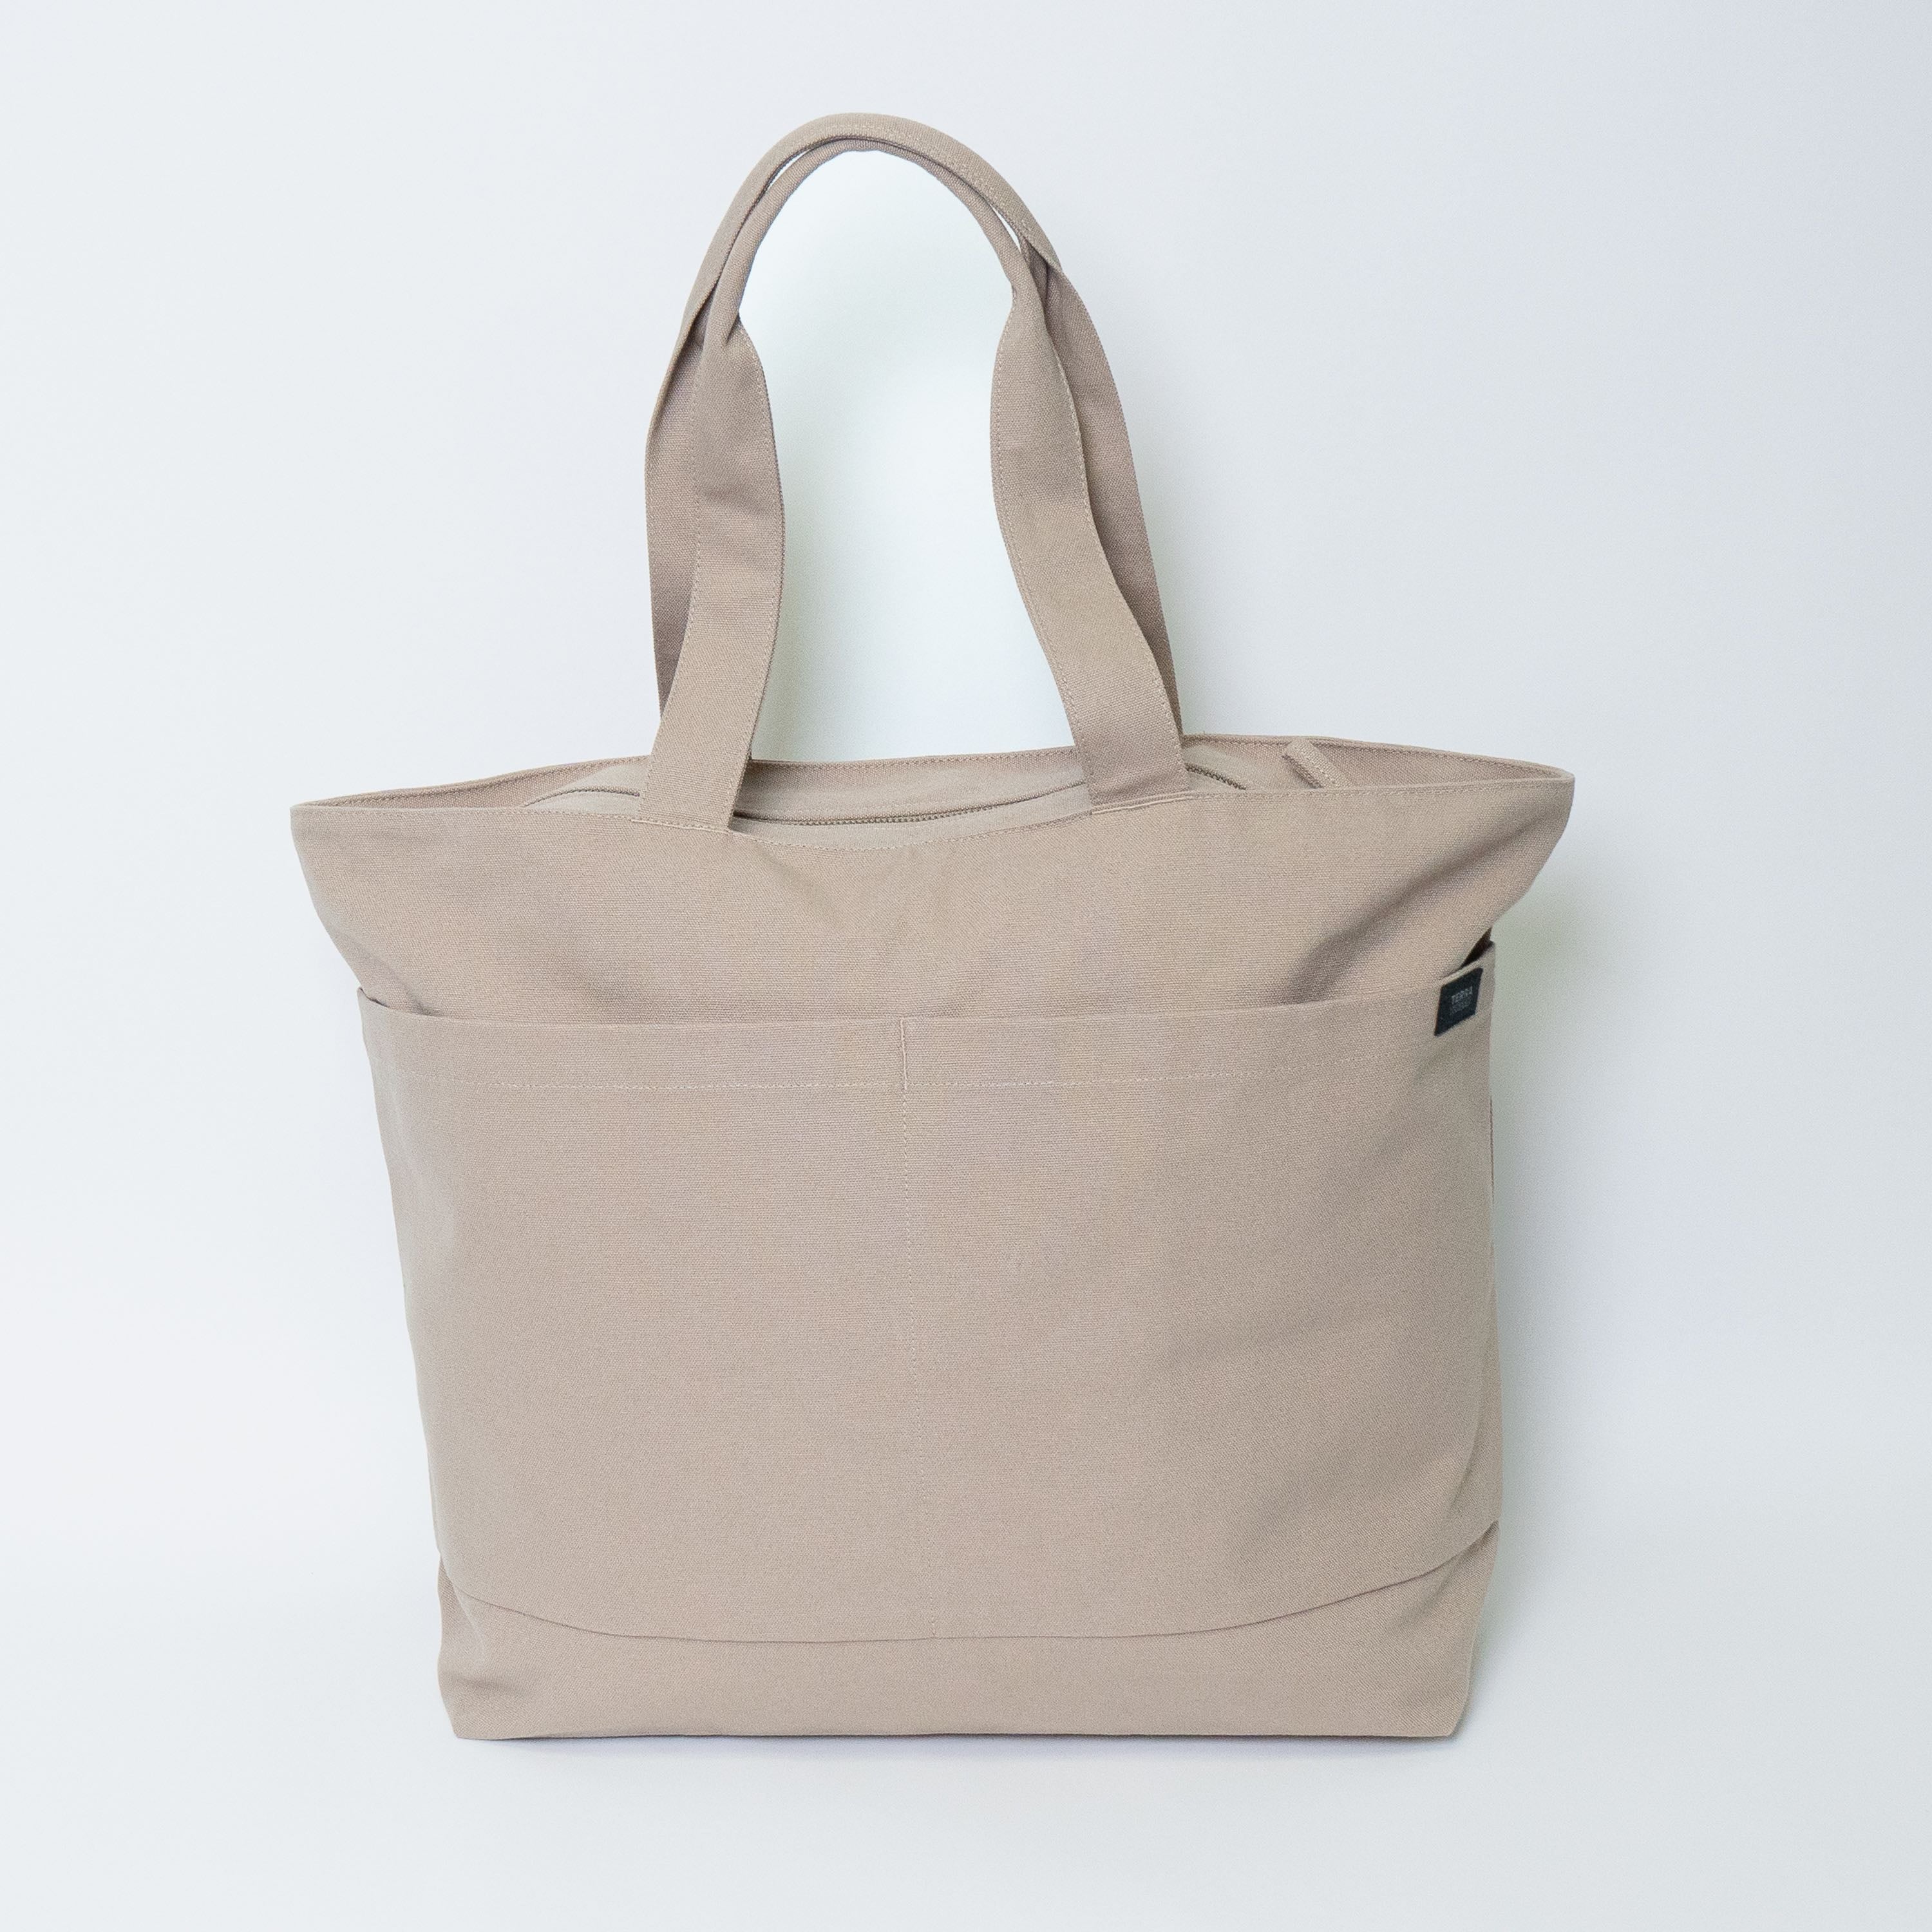 big tote bags for travel